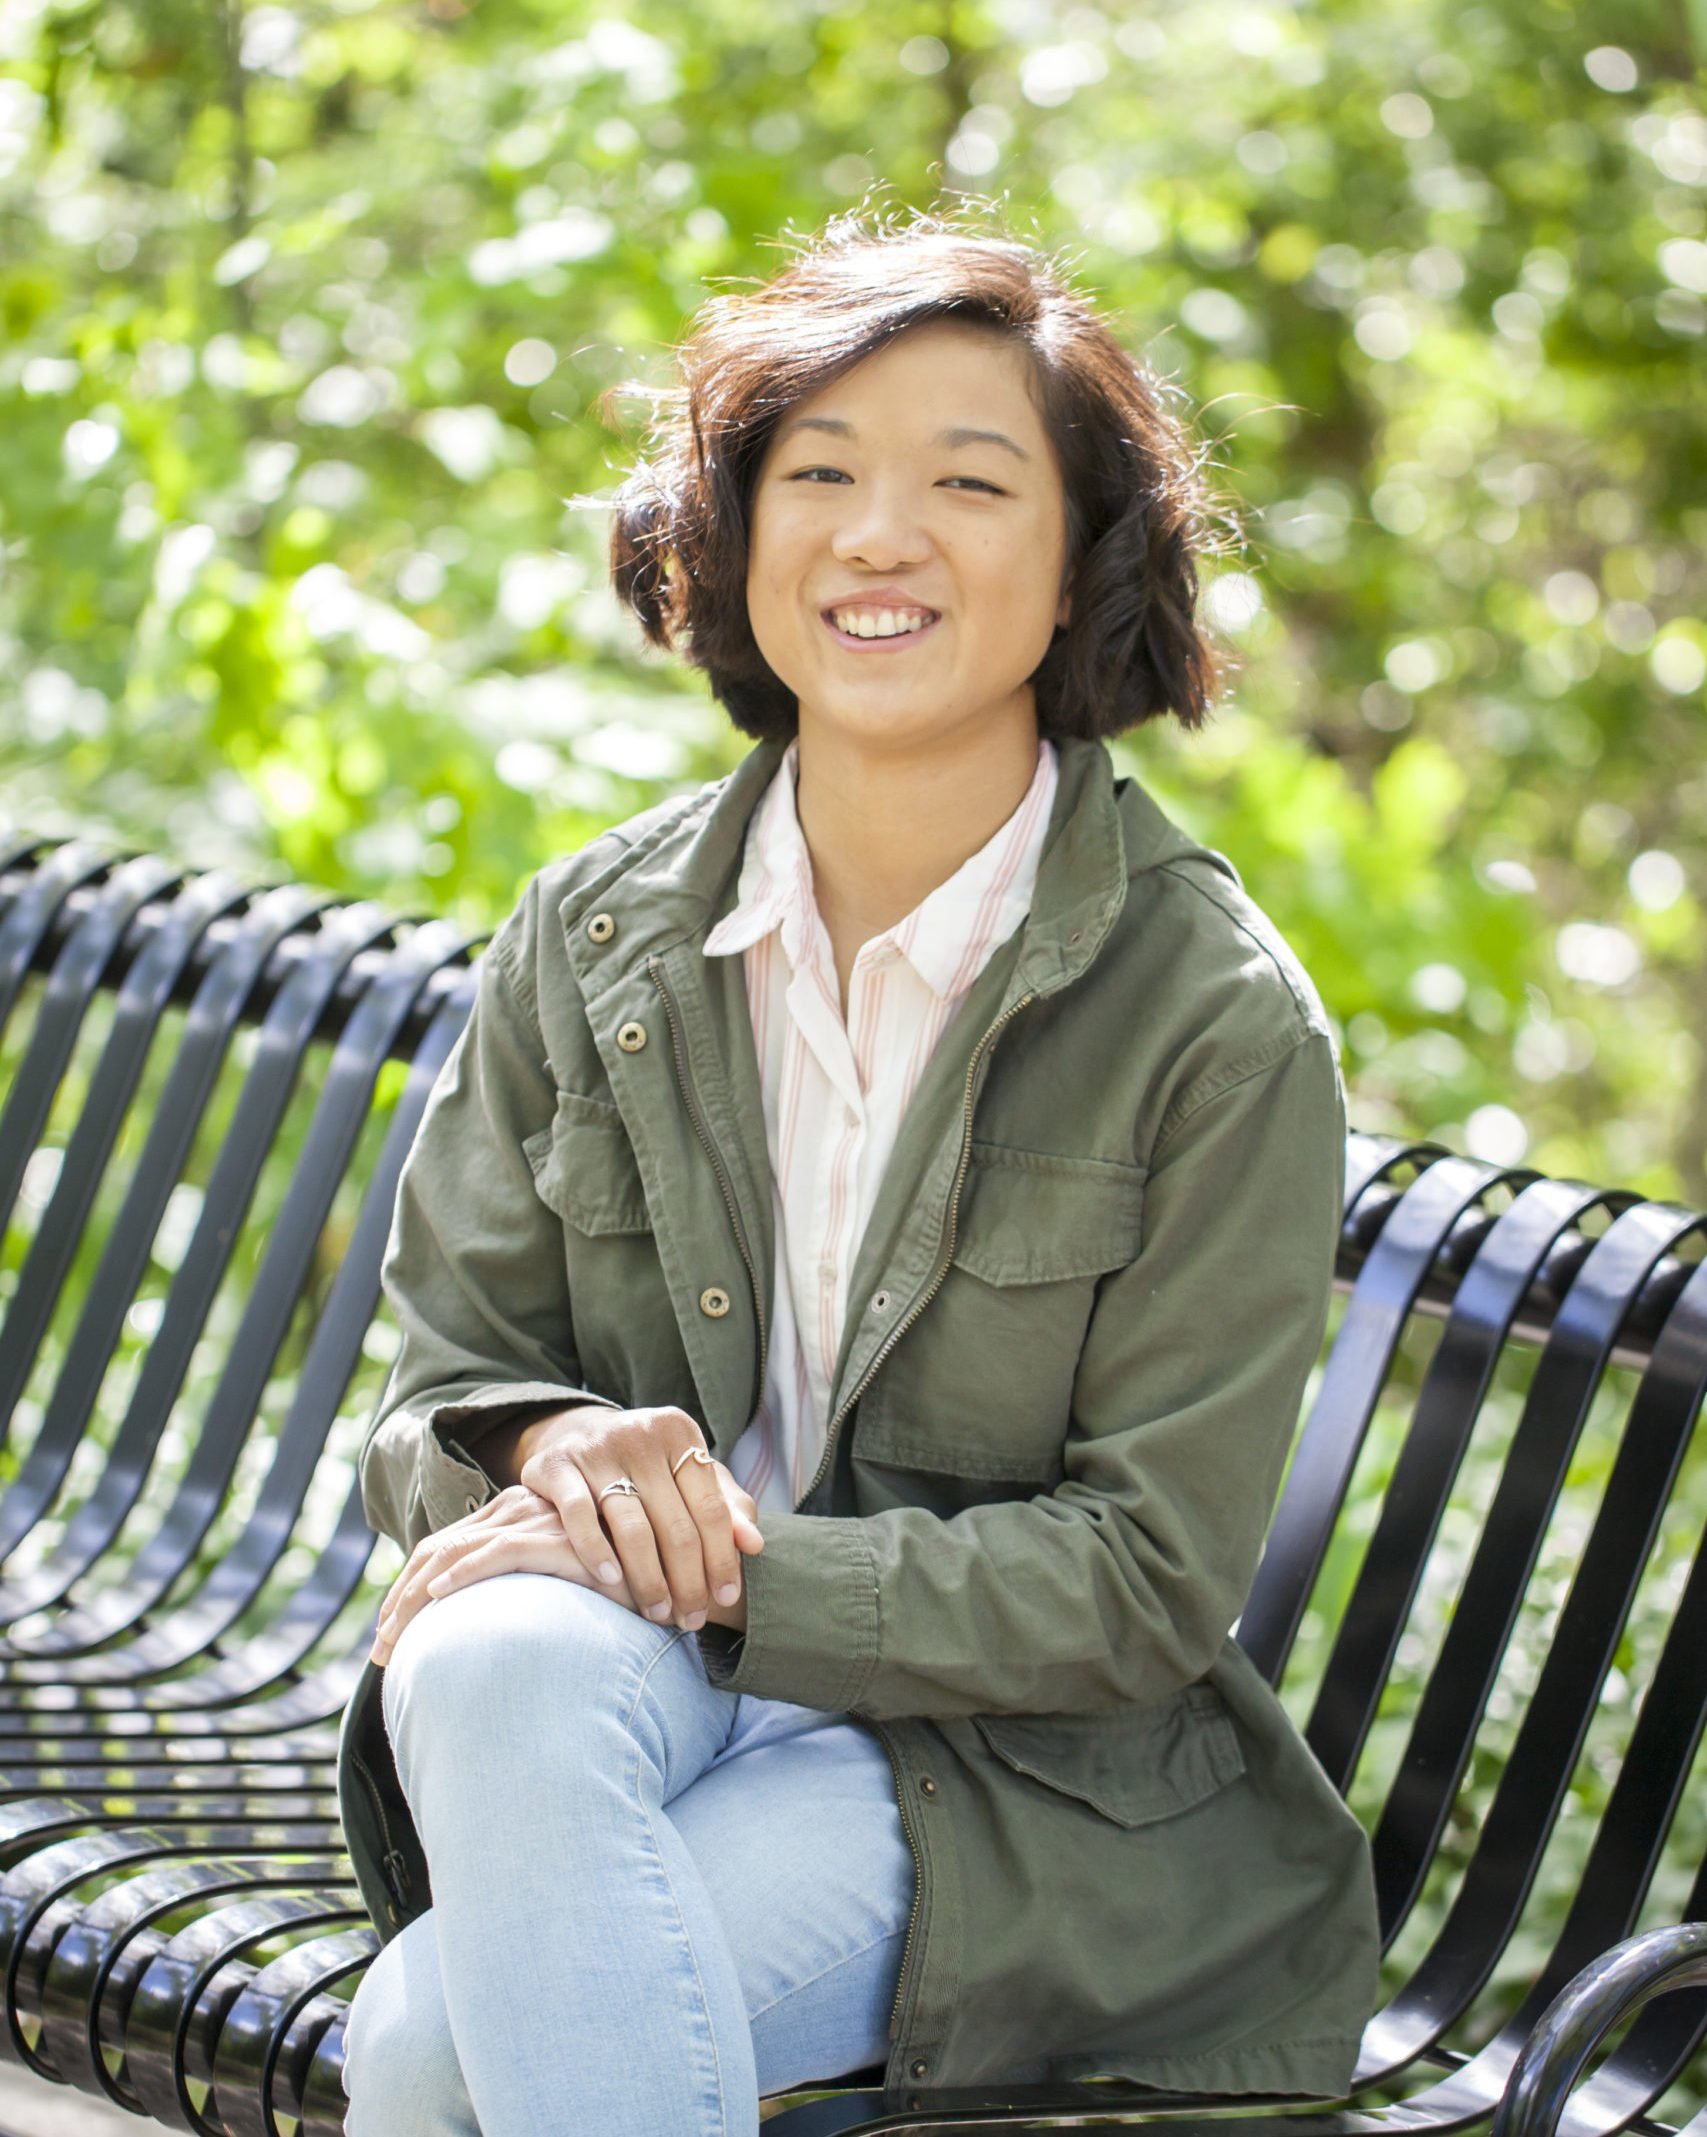 smiling girl with short hair sitting on black metal park bench wearing jeans and green jacket